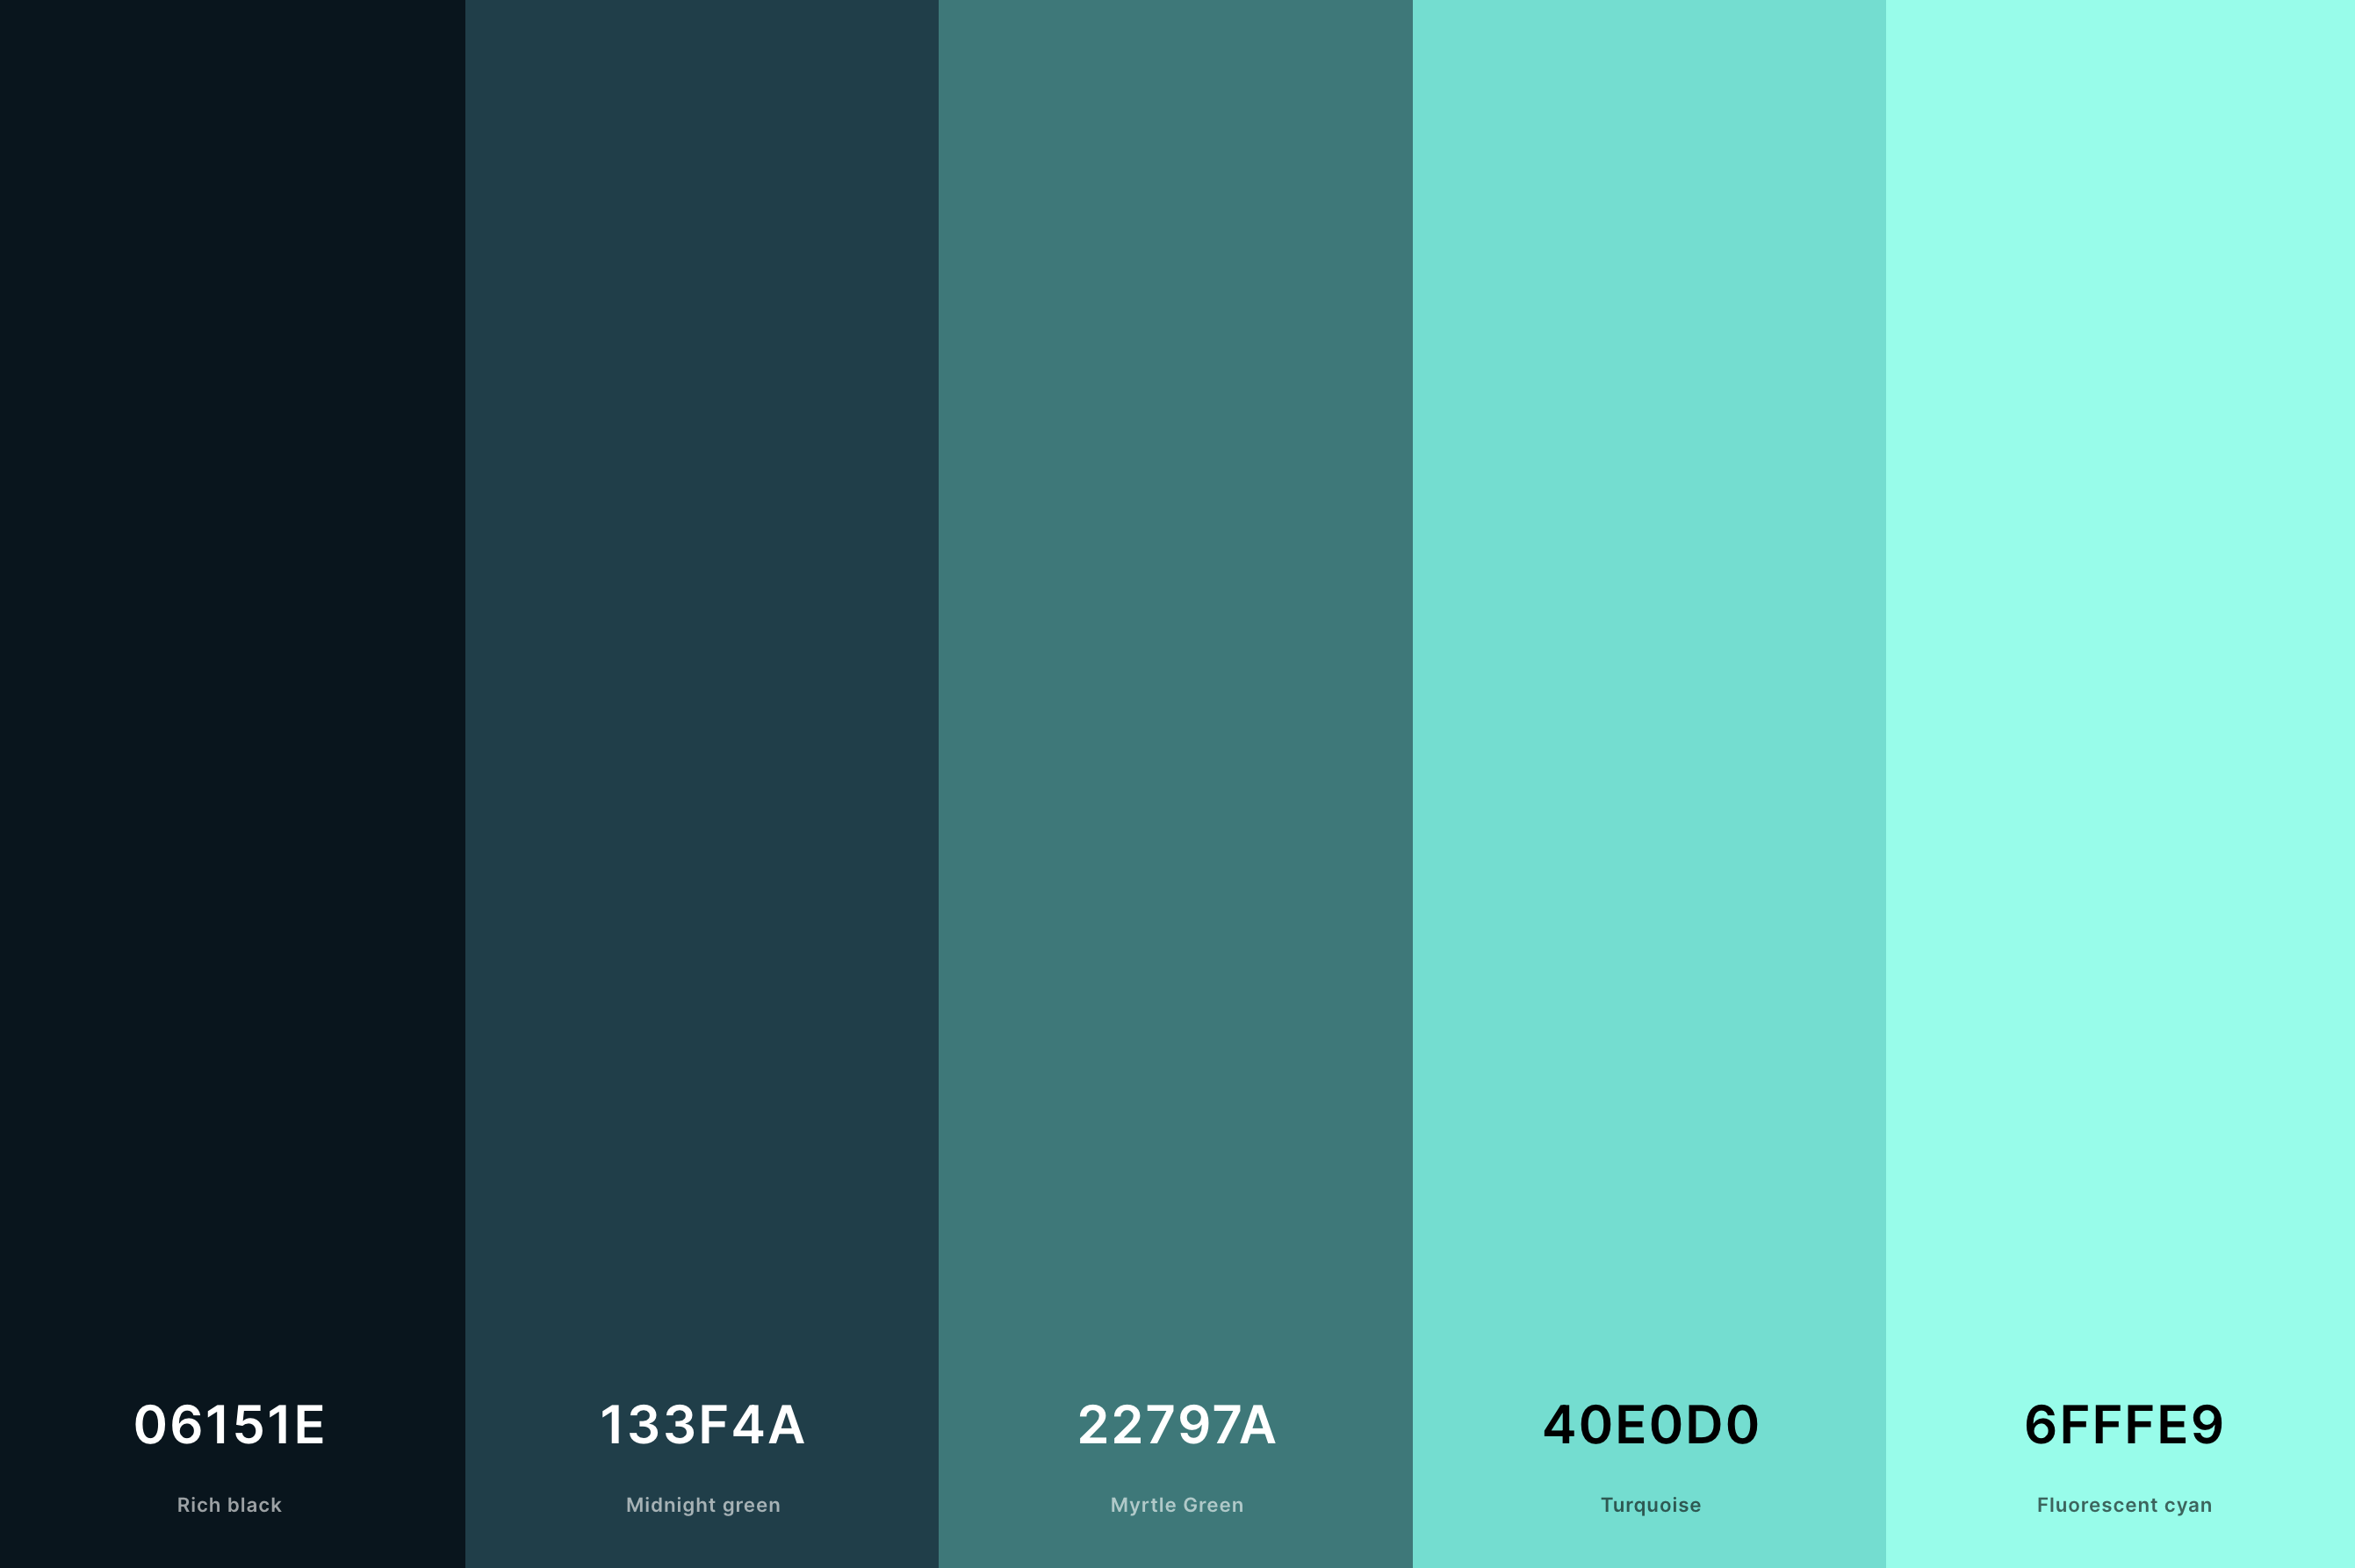 25. Black And Turquoise Color Palette Color Palette with Rich Black (Hex #06151E) + Midnight Green (Hex #133F4A) + Myrtle Green (Hex #22797A) + Turquoise (Hex #40E0D0) + Fluorescent Cyan (Hex #6FFFE9) Color Palette with Hex Codes